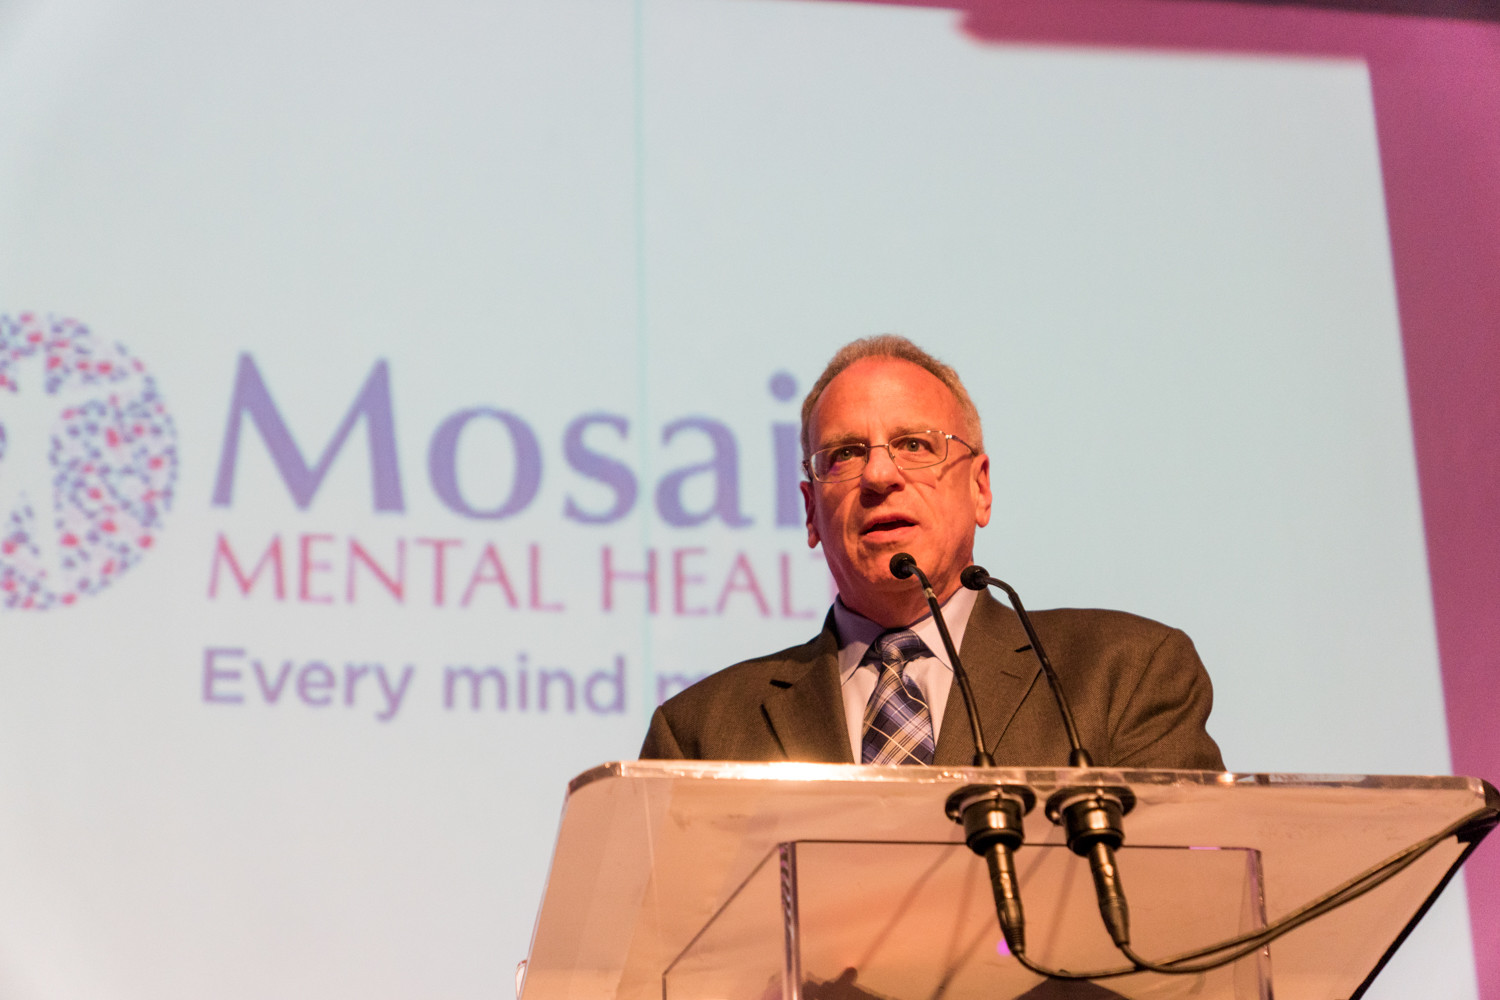 Assemblyman Jeffrey Dinowitz speaks about the importance of mental health at a gala celebrating Mosaic Mental Health's rebranding. The new name reflects its wide range of service and communities beyond Riverdale.